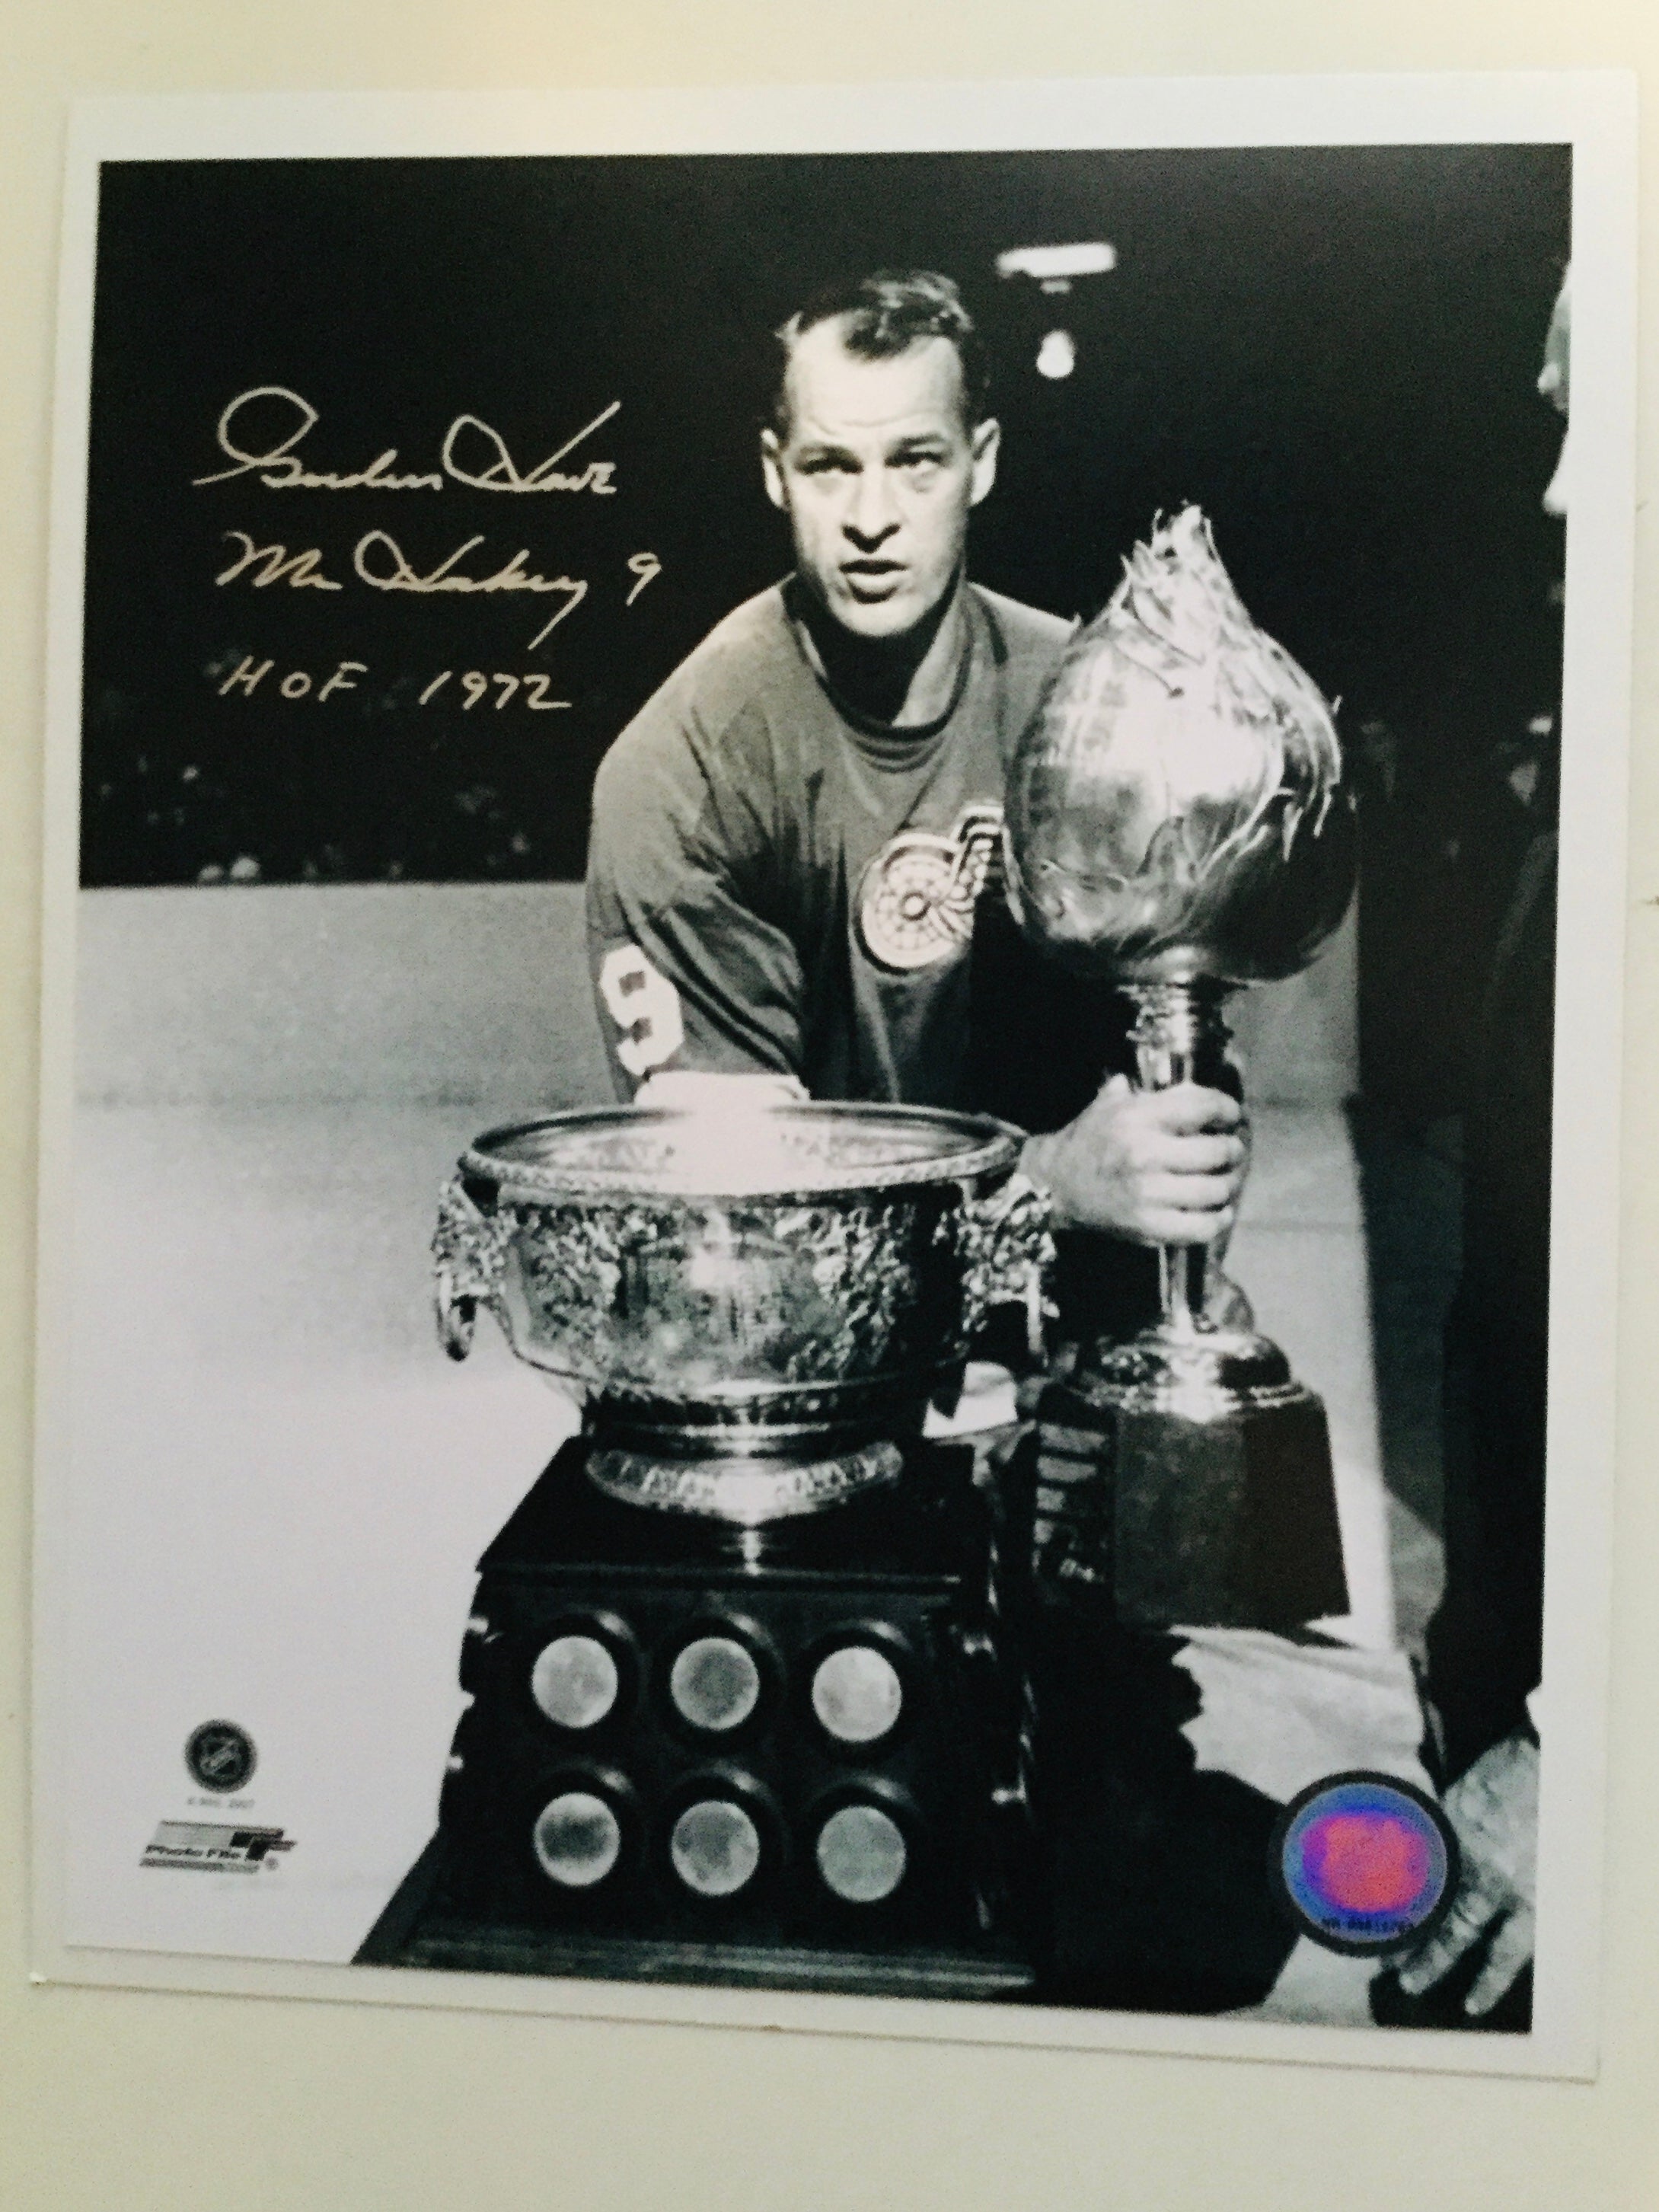 Gordie Howe NHL hockey legend signed in person autograph with COA